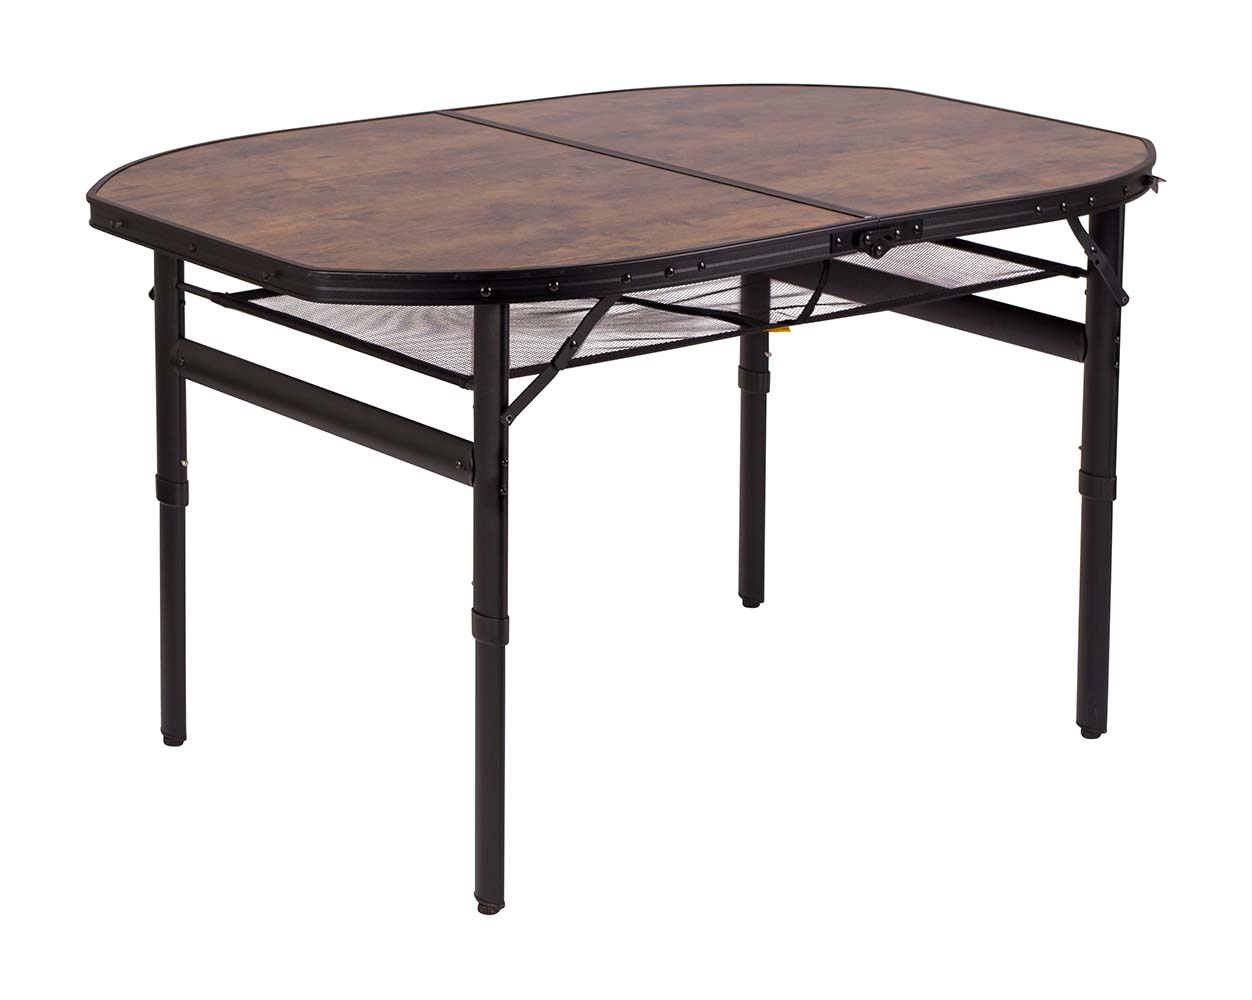 1404220 Bo-Camp - Industrial collection - Tafel - Melrose - Ovaal - Koffermodel - 120x80 cm